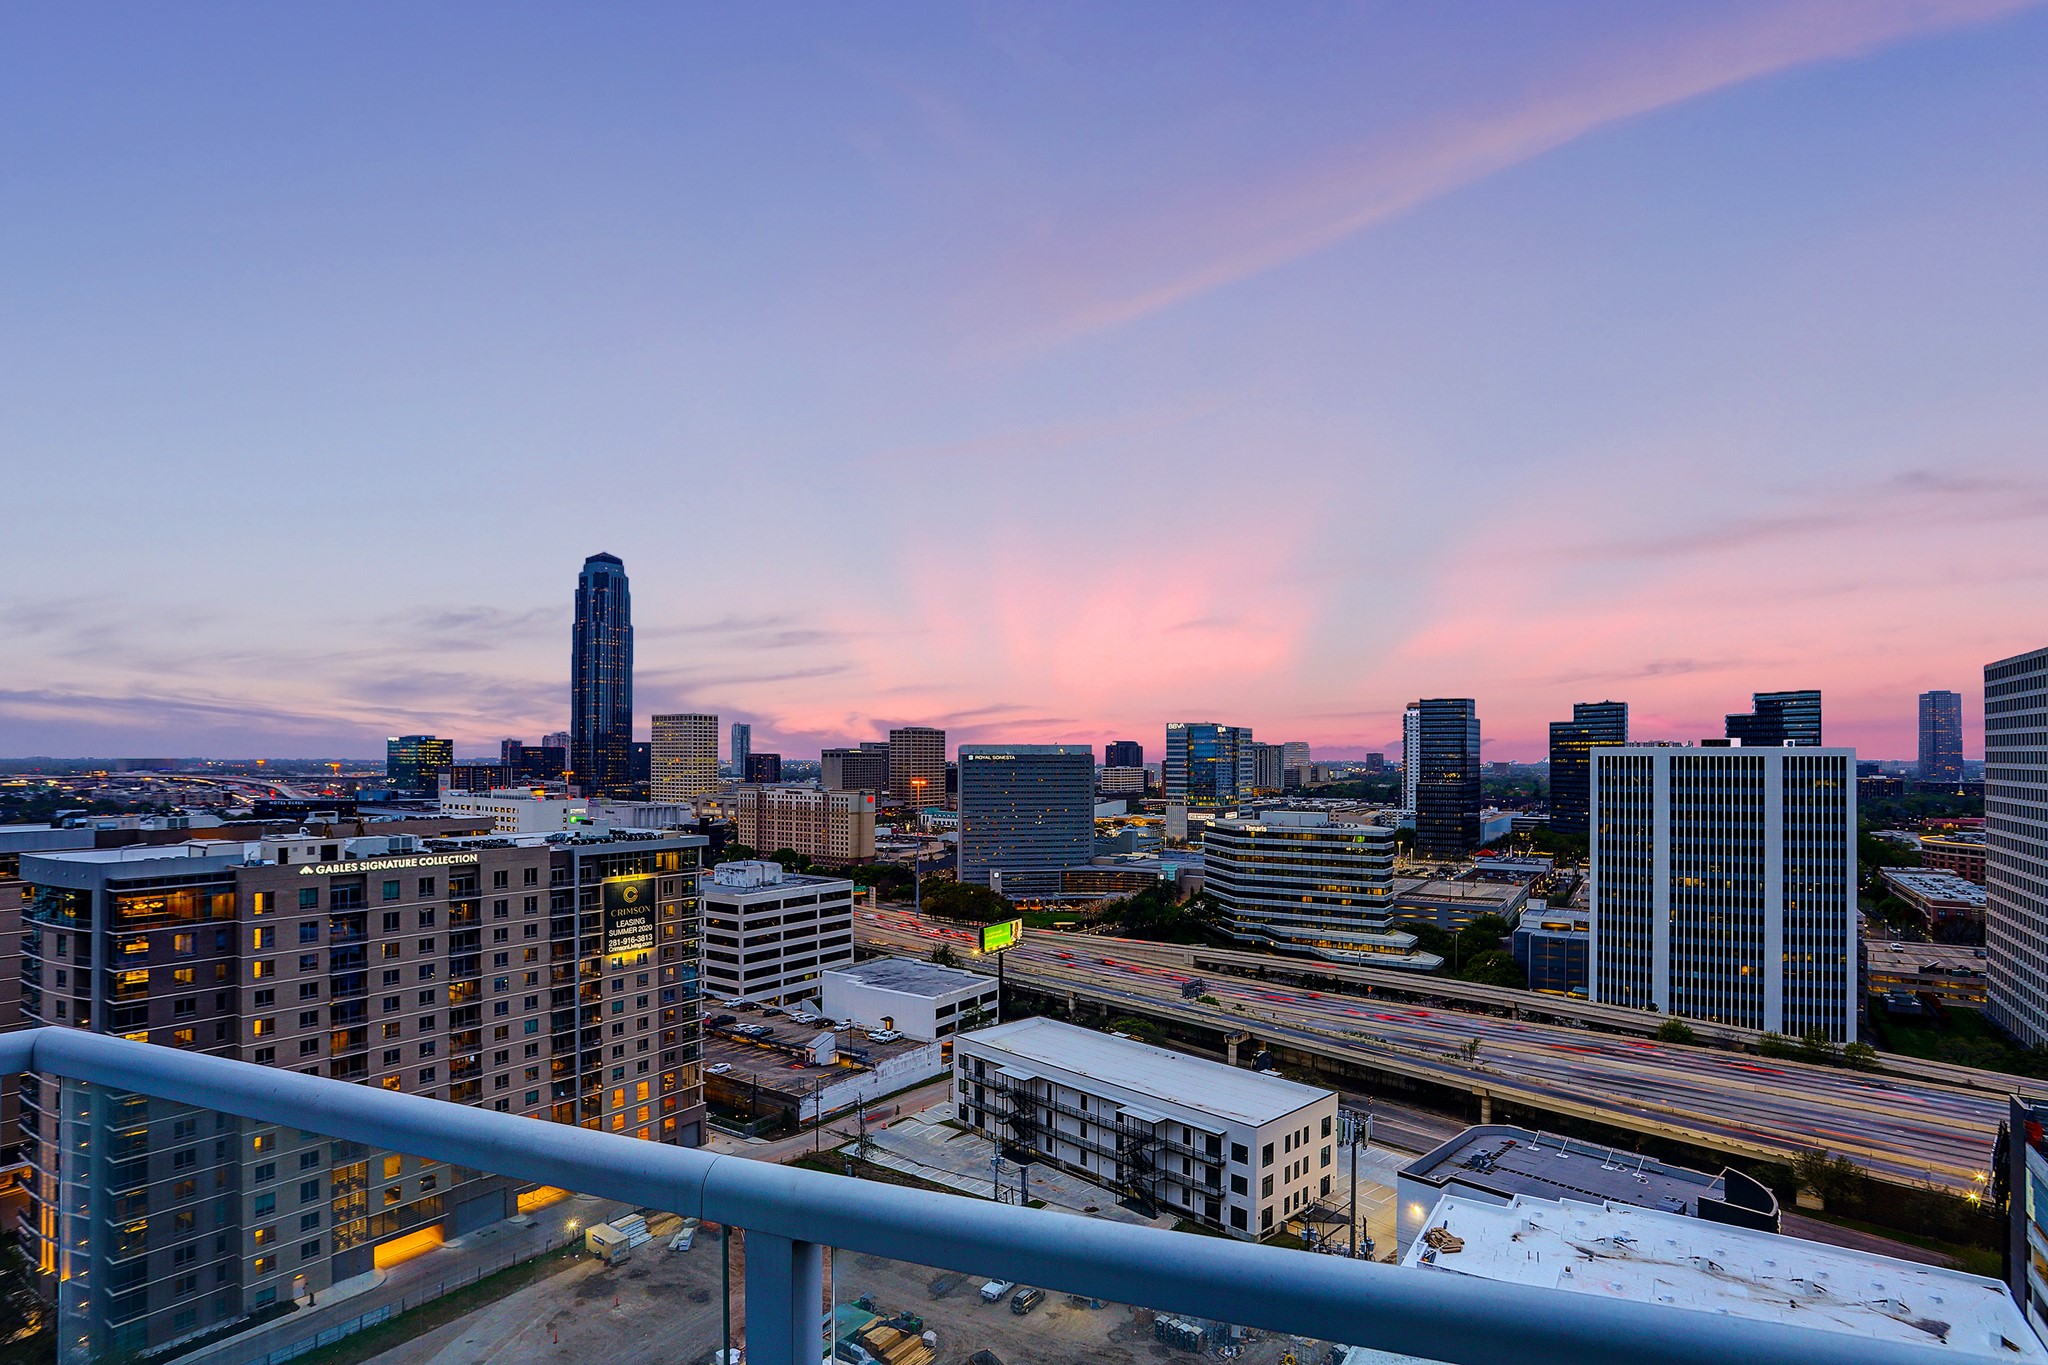 Enjoy expansive sunset views of the Galleria from the wide COVERED BALCONY and from plentiful floor-to-ceiling windows throughout the condo.